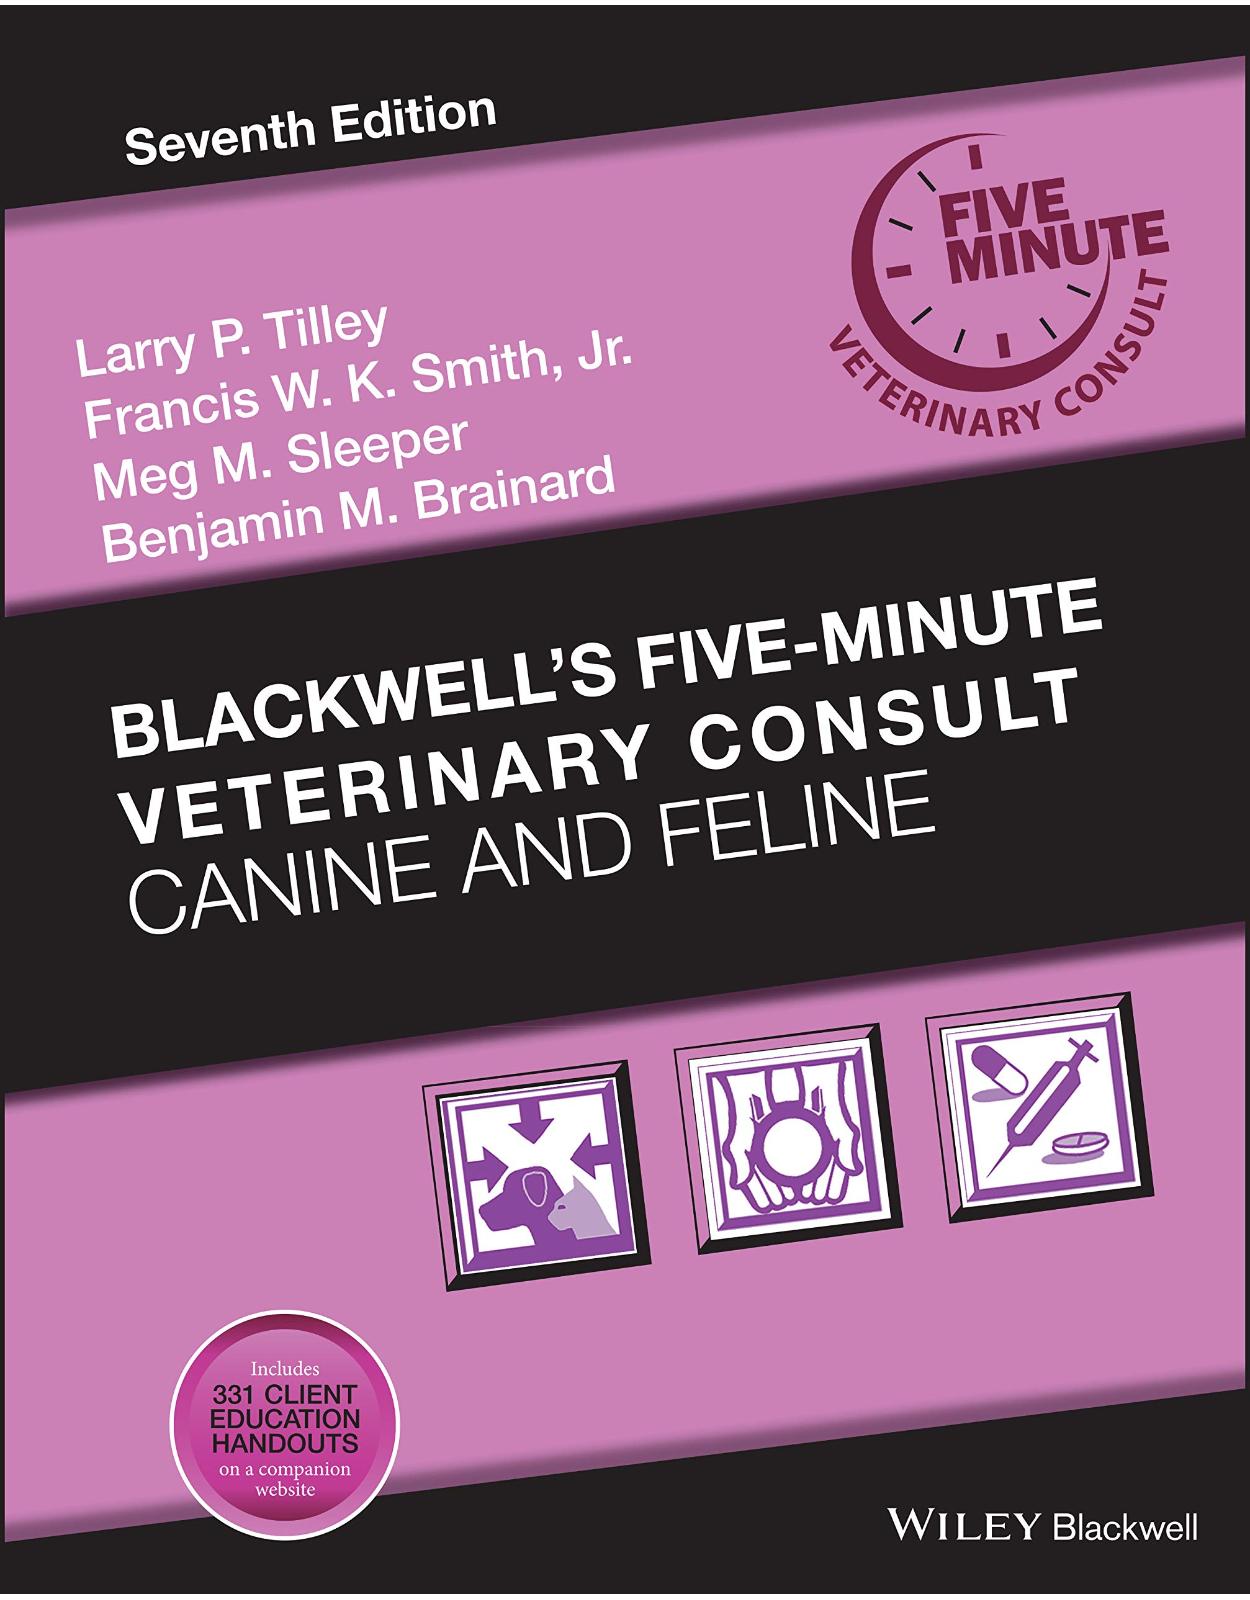 Blackwell’s Five-Minute Veterinary Consult: Canine and Feline, 7th Edition